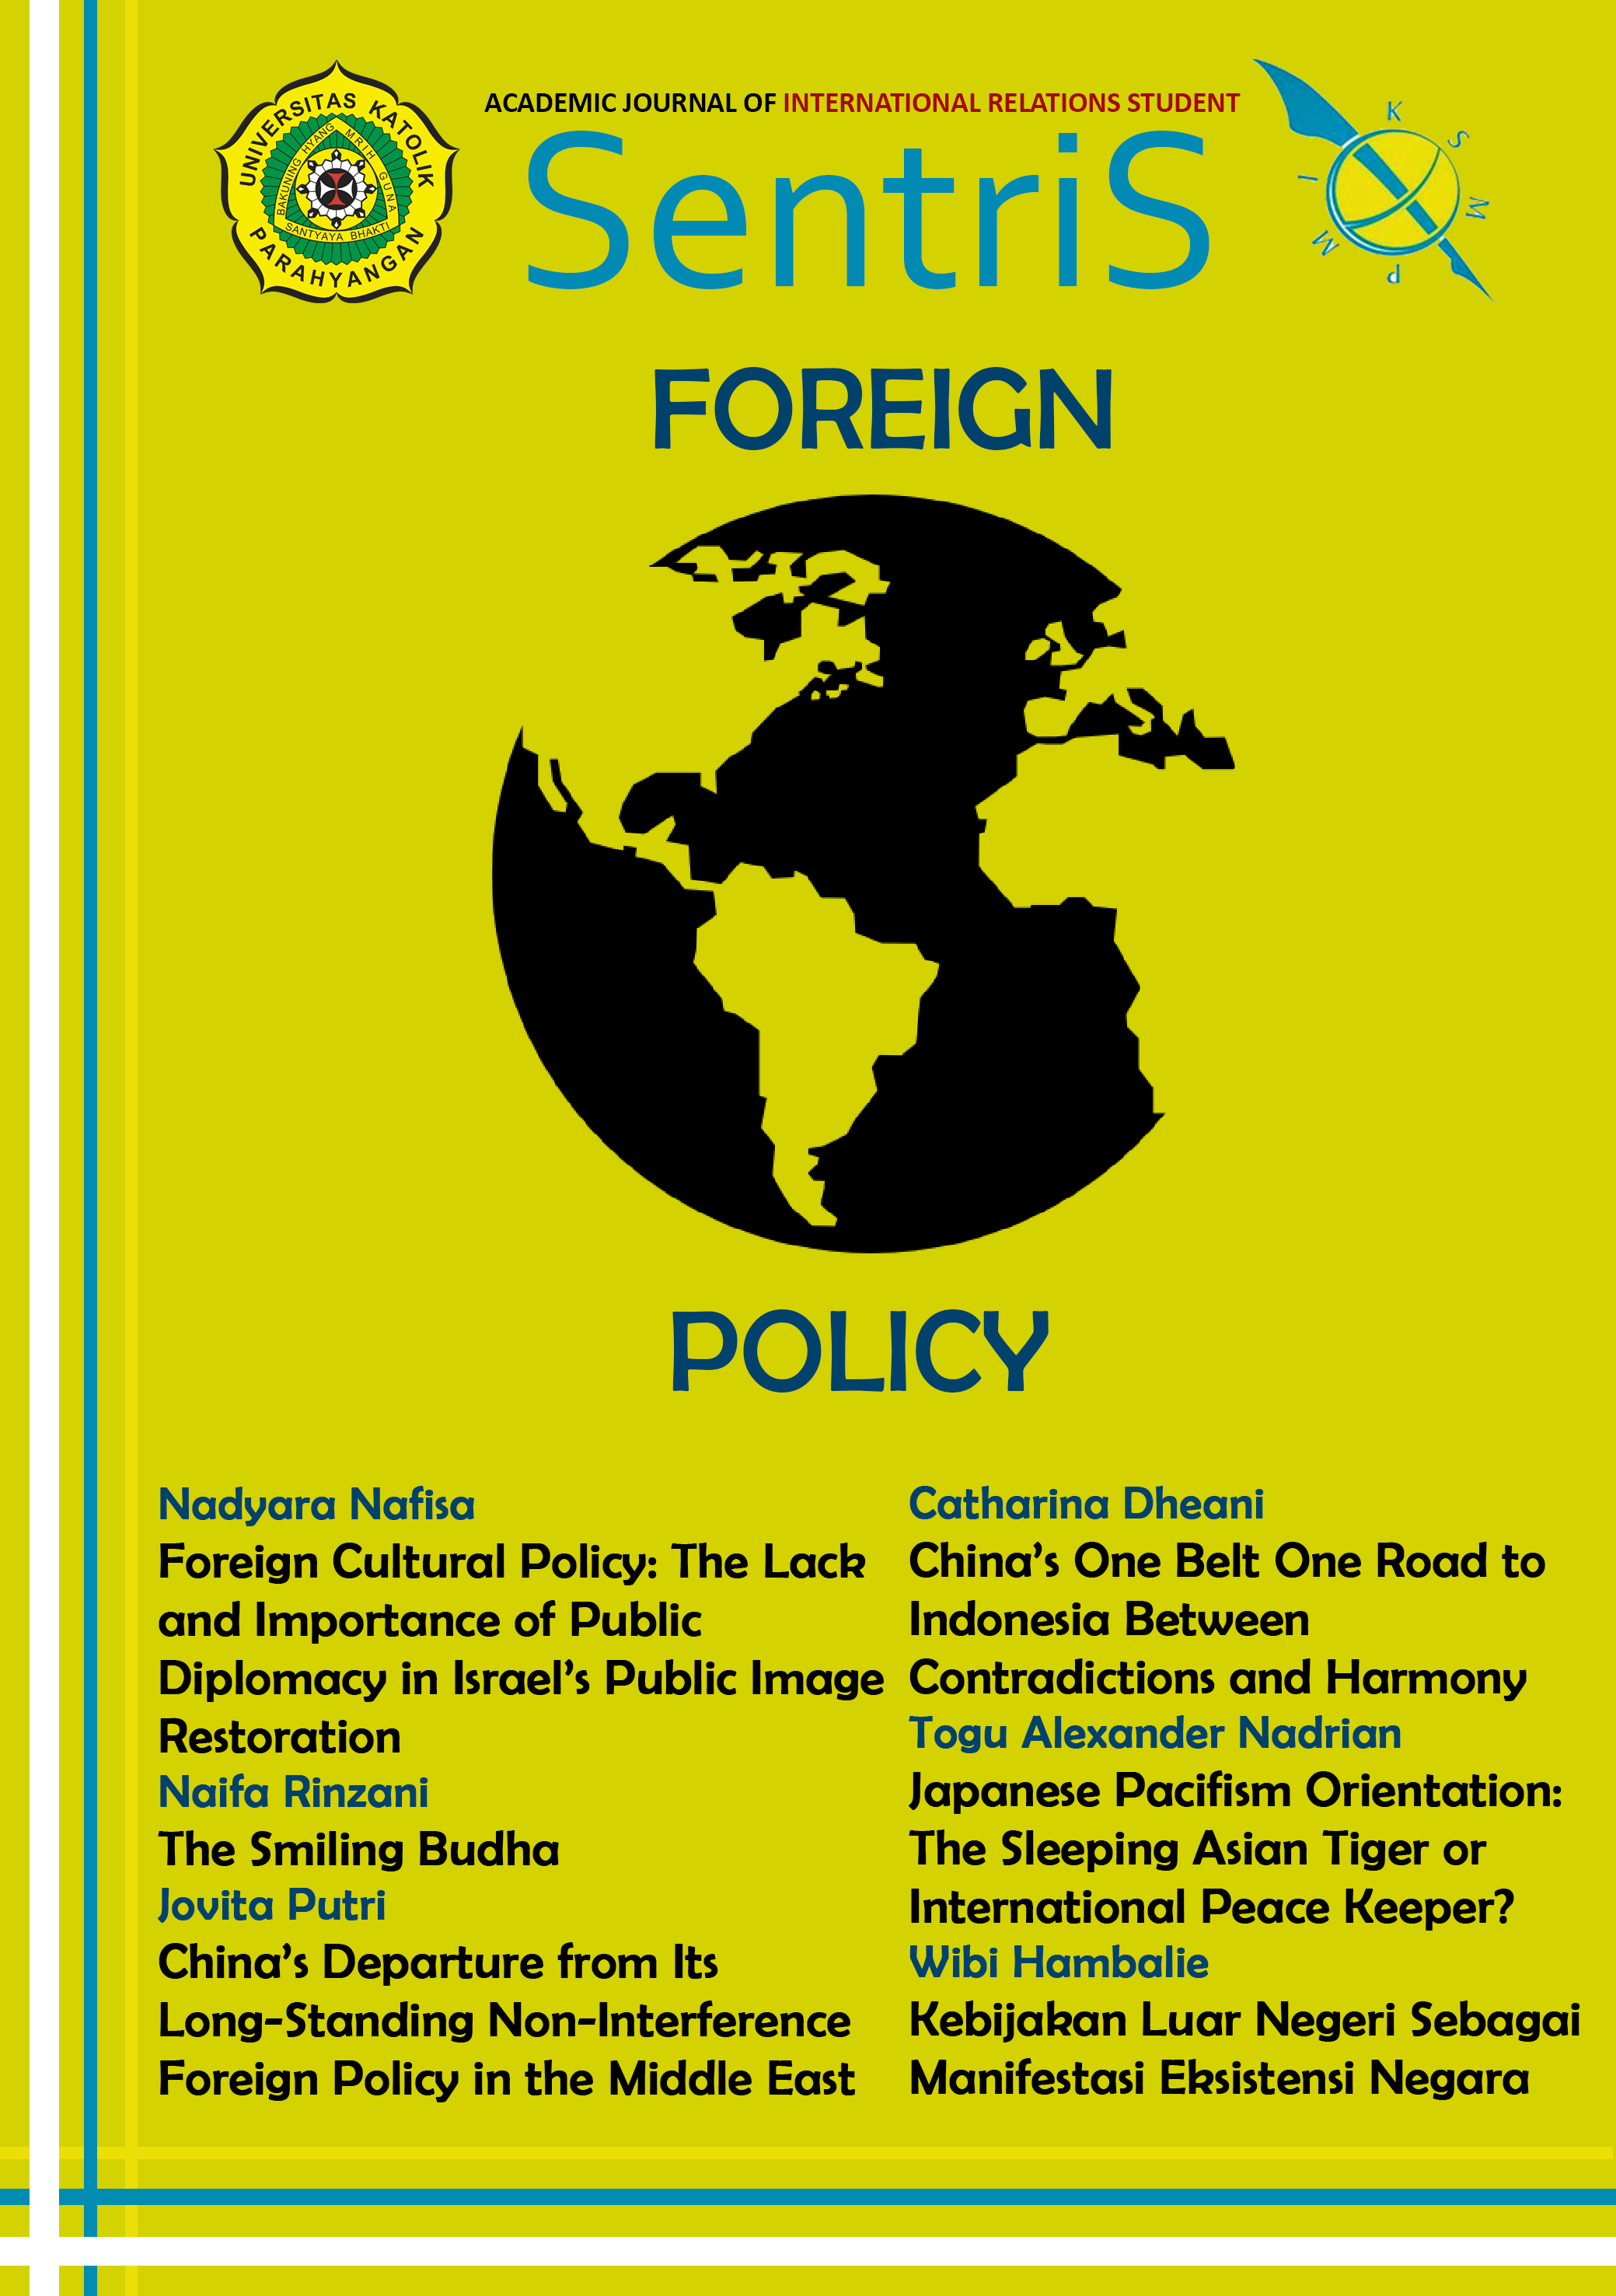 					Lihat Vol 2 No 2 (2017): Foreign Policy
				